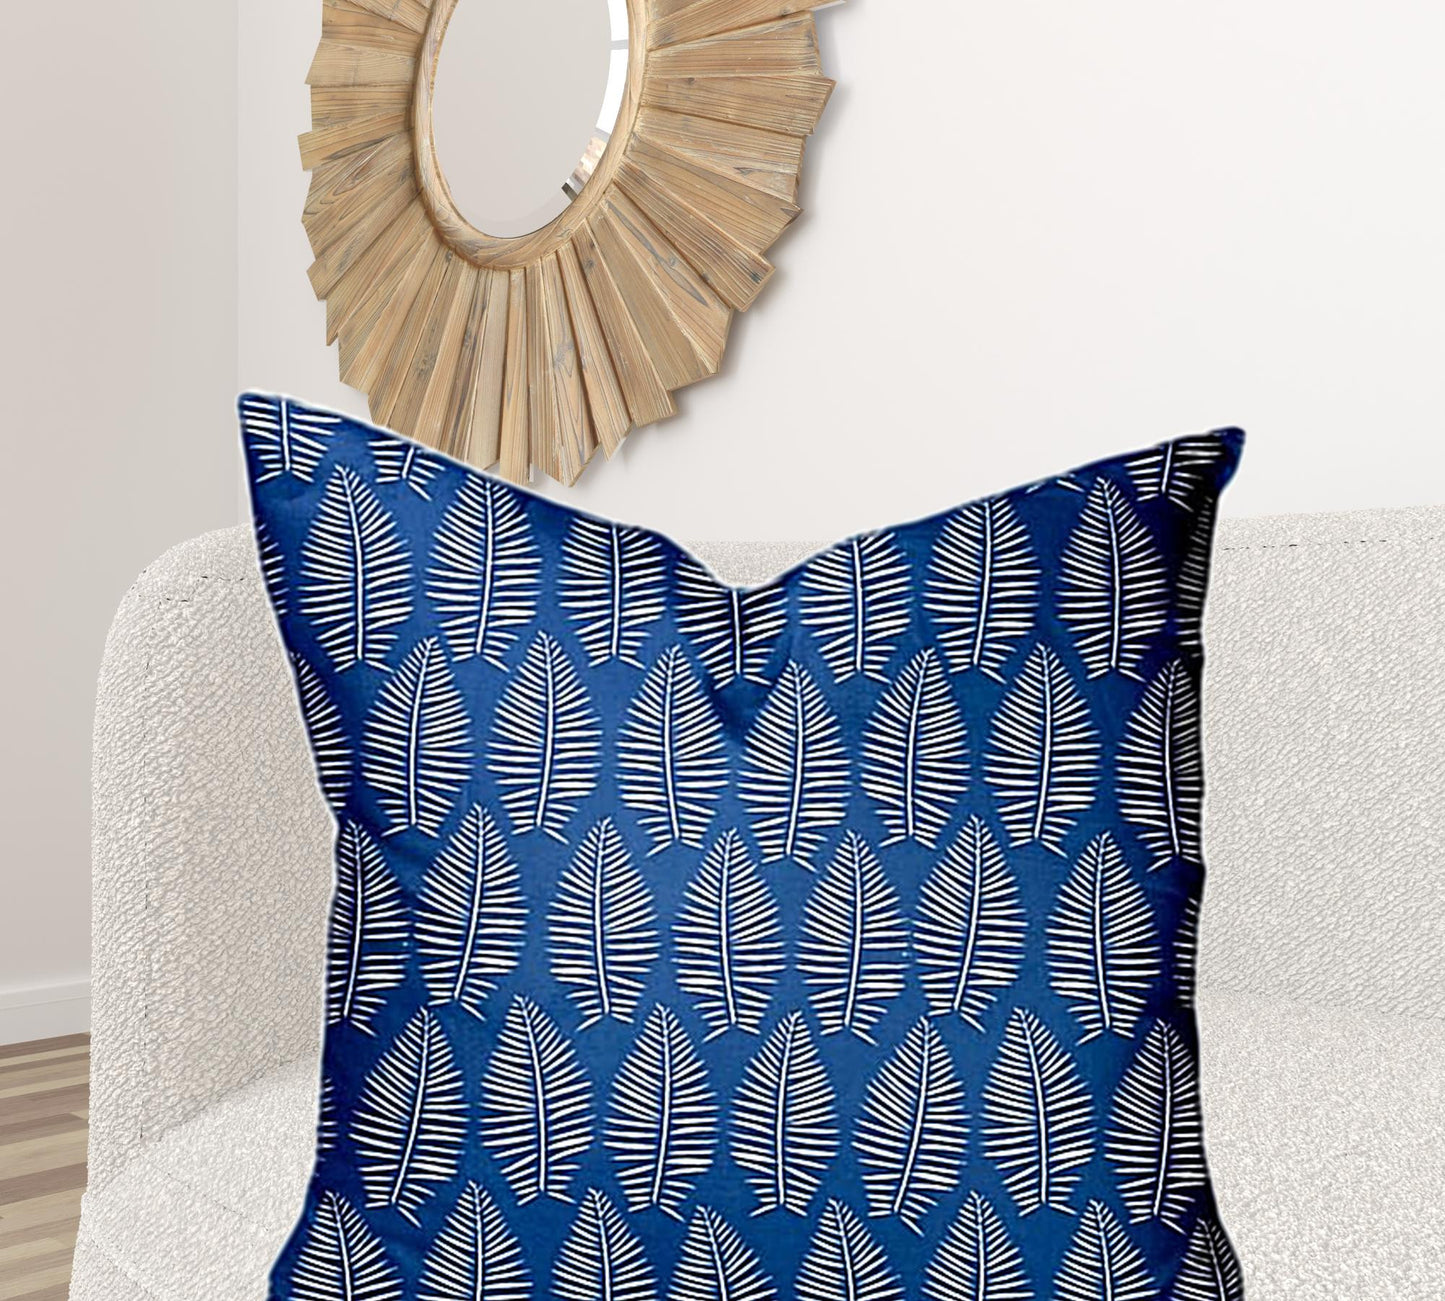 36" X 36" Blue And White Enveloped Tropical Throw Indoor Outdoor Pillow